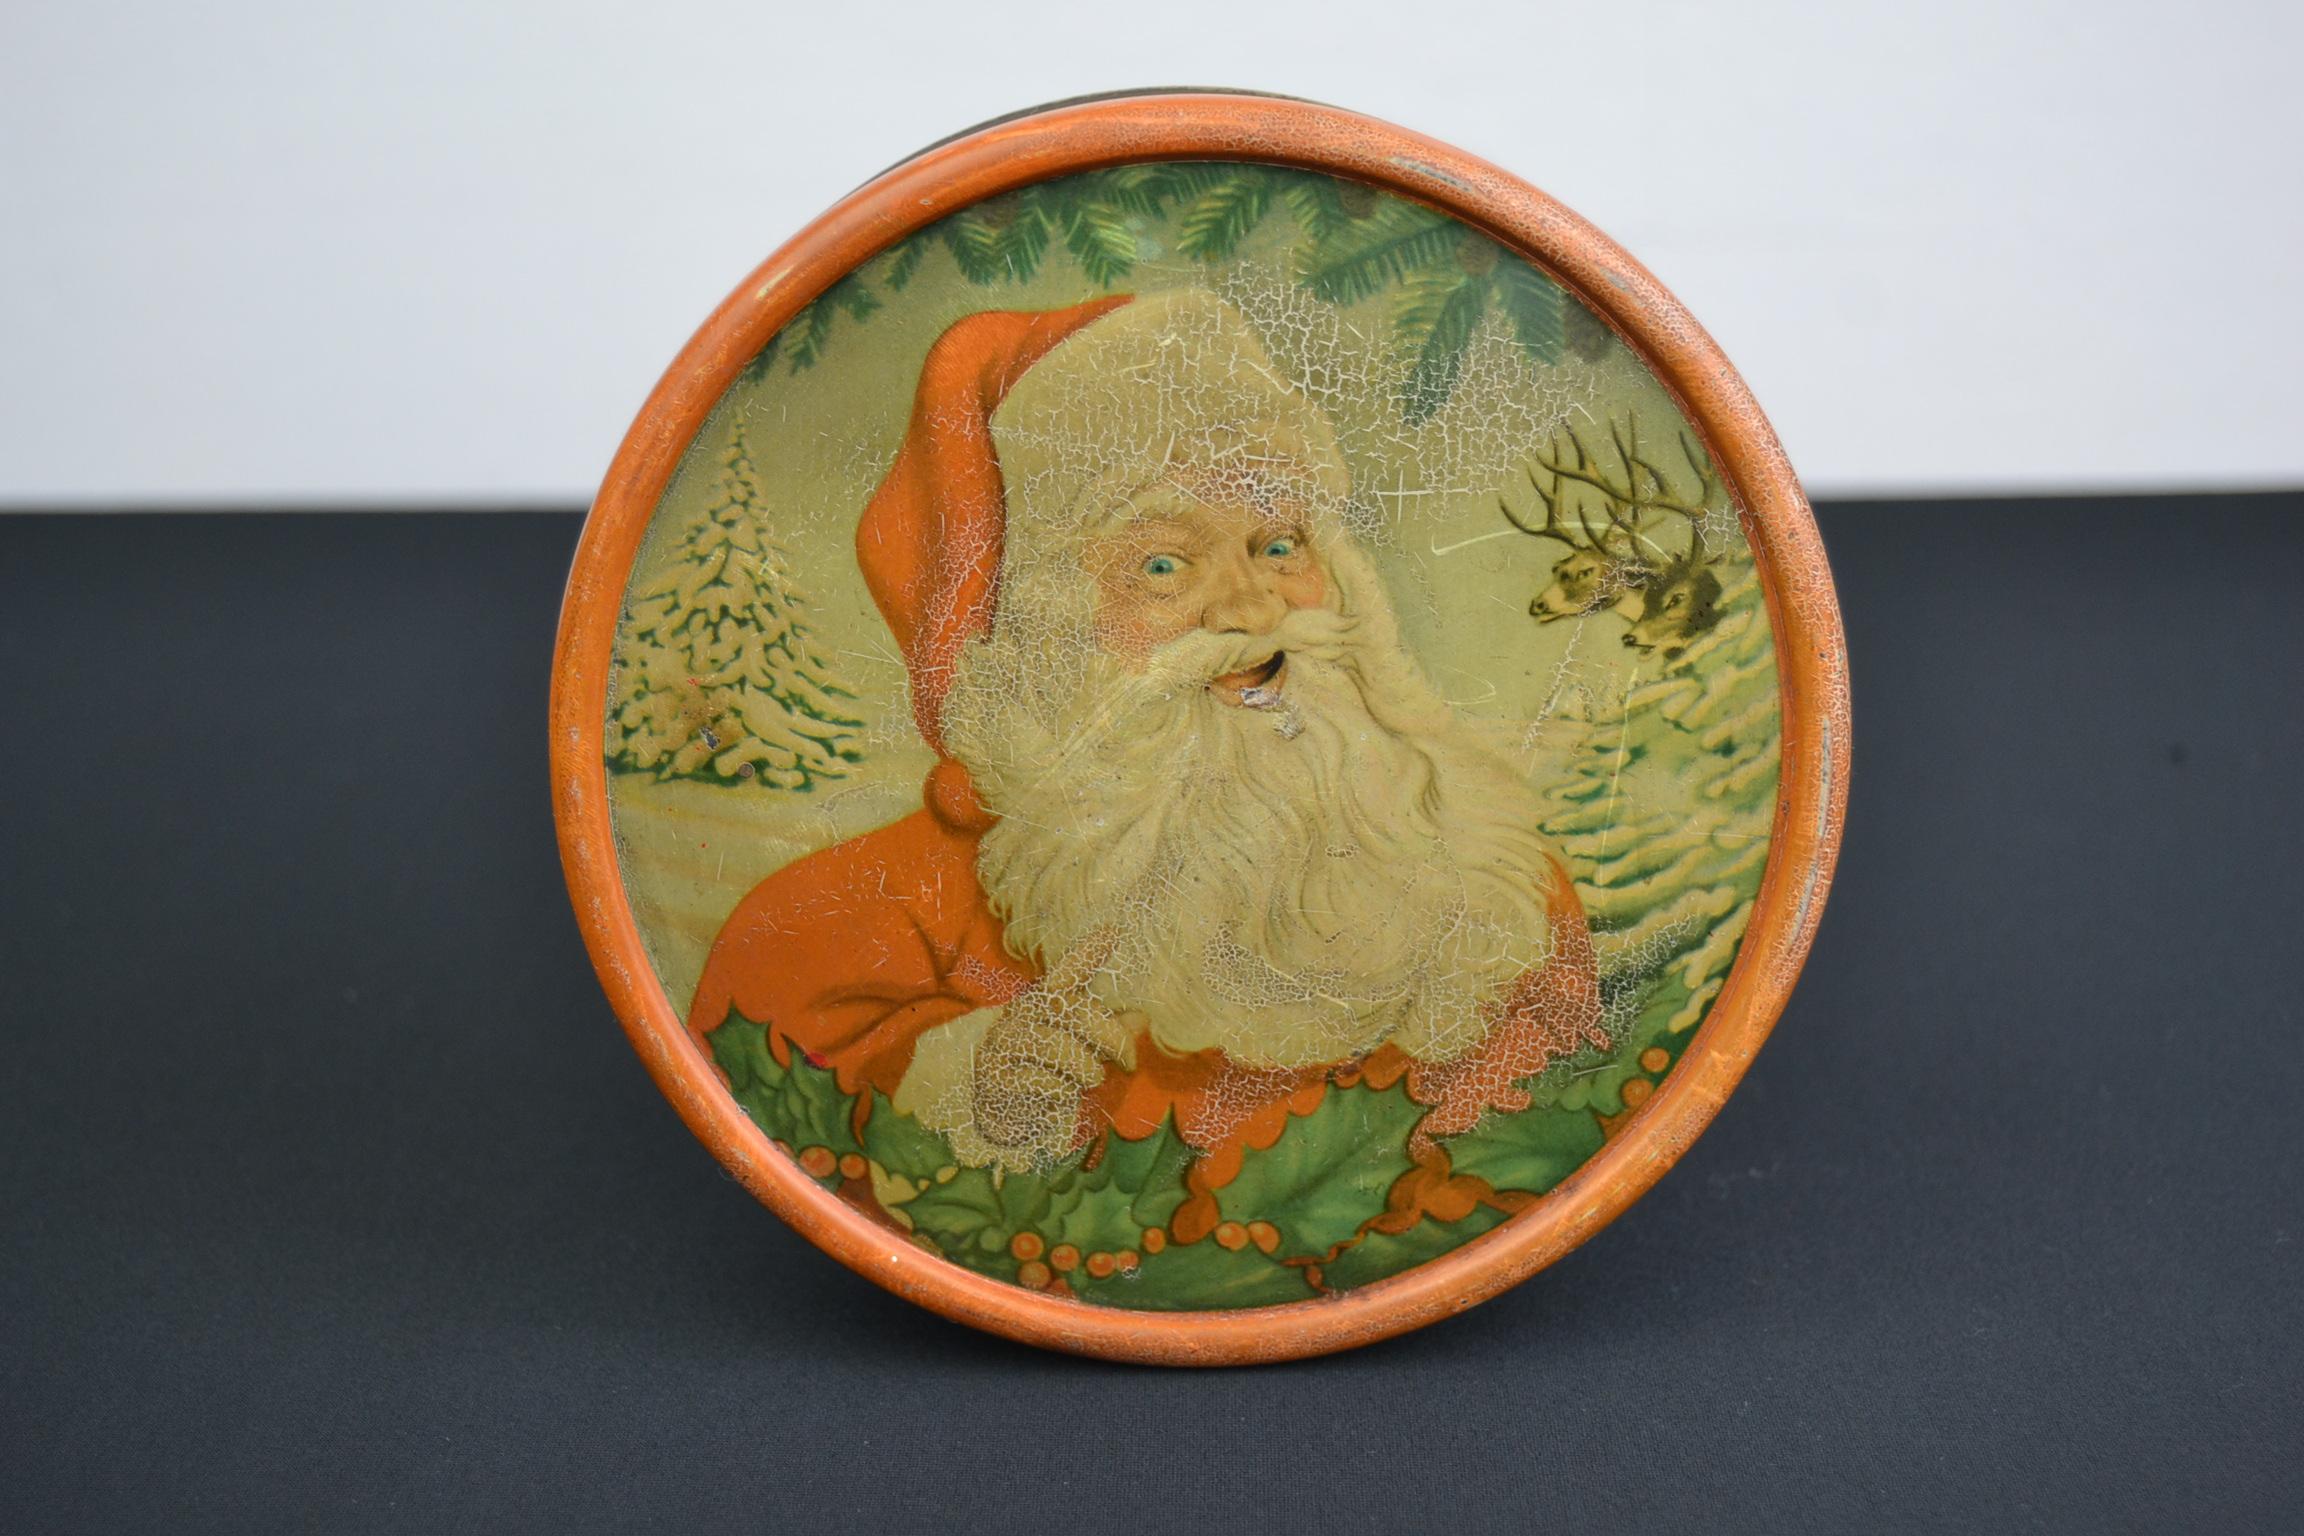 Belgian tin with Santa Claus on. This round tin with Christmas design was made for the confectionary brand M.F.G Demaret Brussels Belgium. On the lid you see Father Christmas, reindeer, Christmas trees and ilex. On the side you see more winter